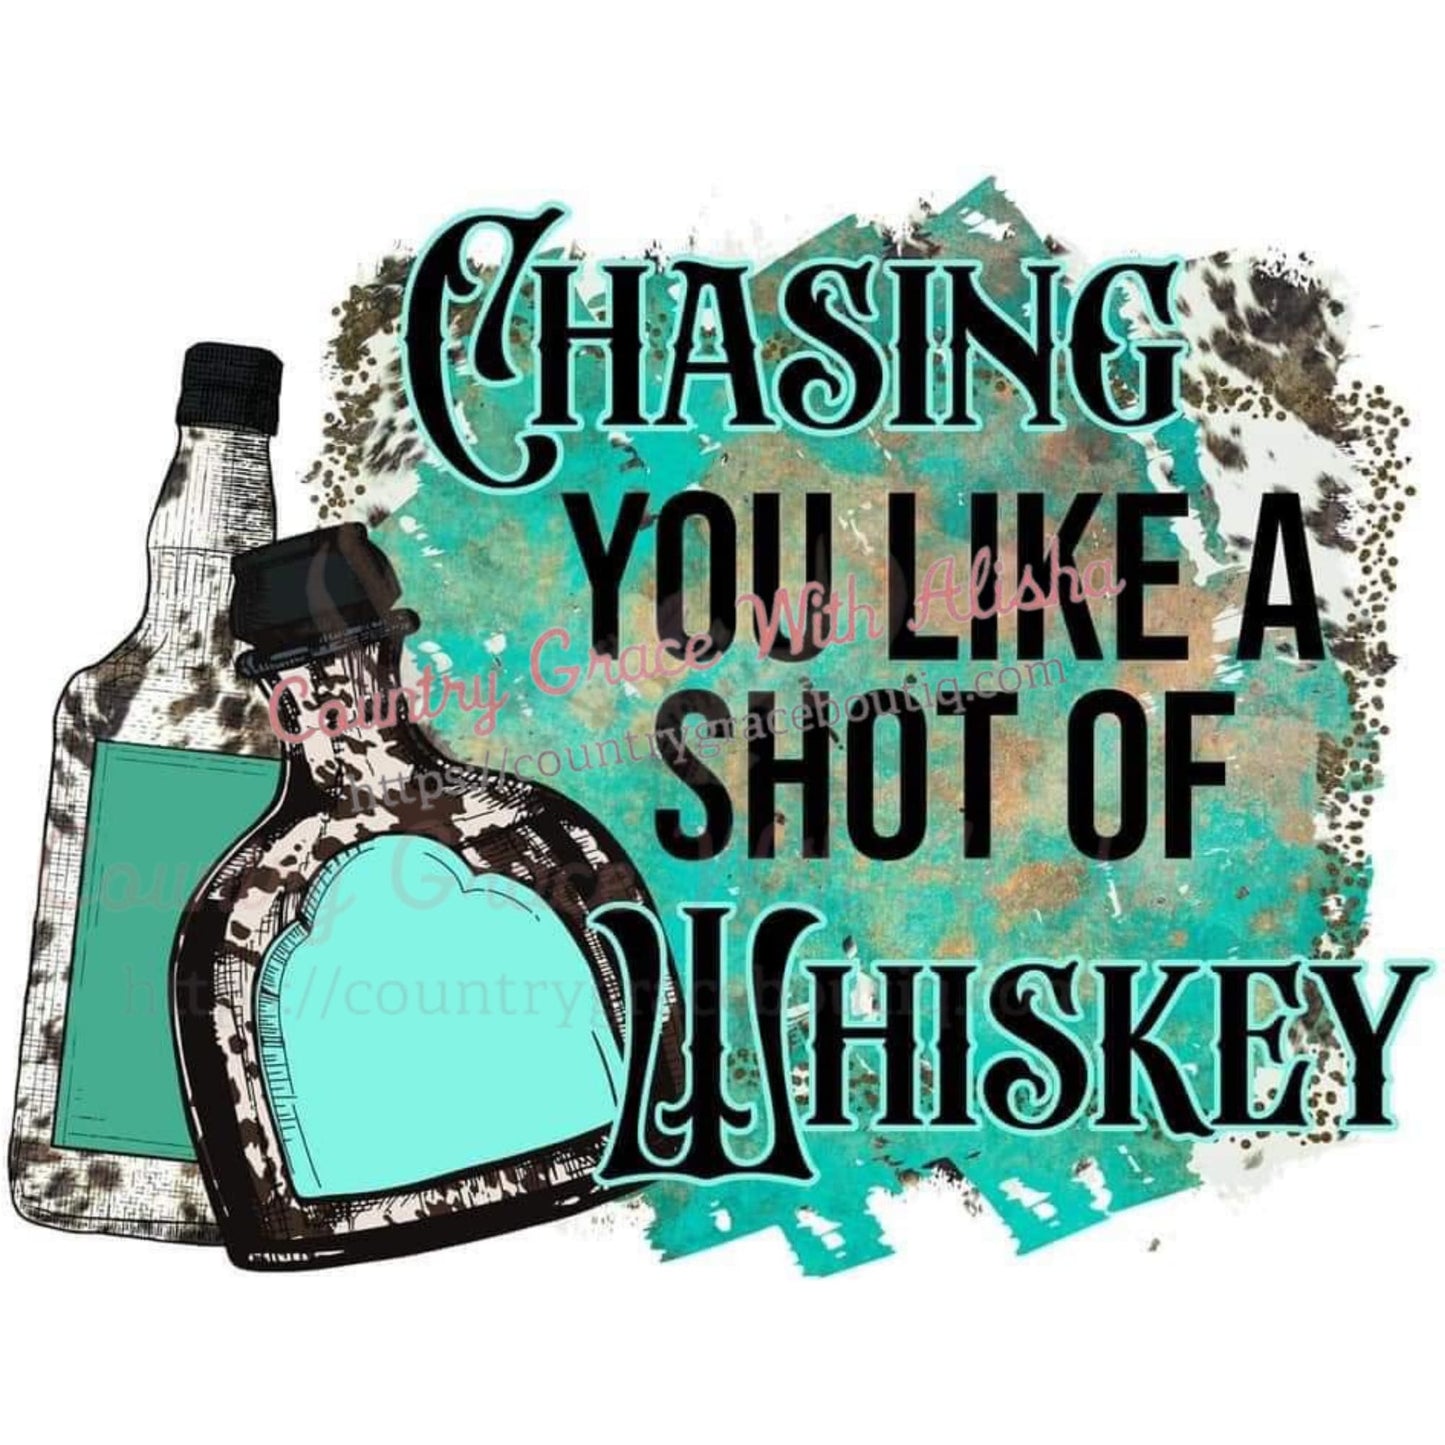 Shot Of Whiskey Sublimation Transfer - Sub $1.50 Country 